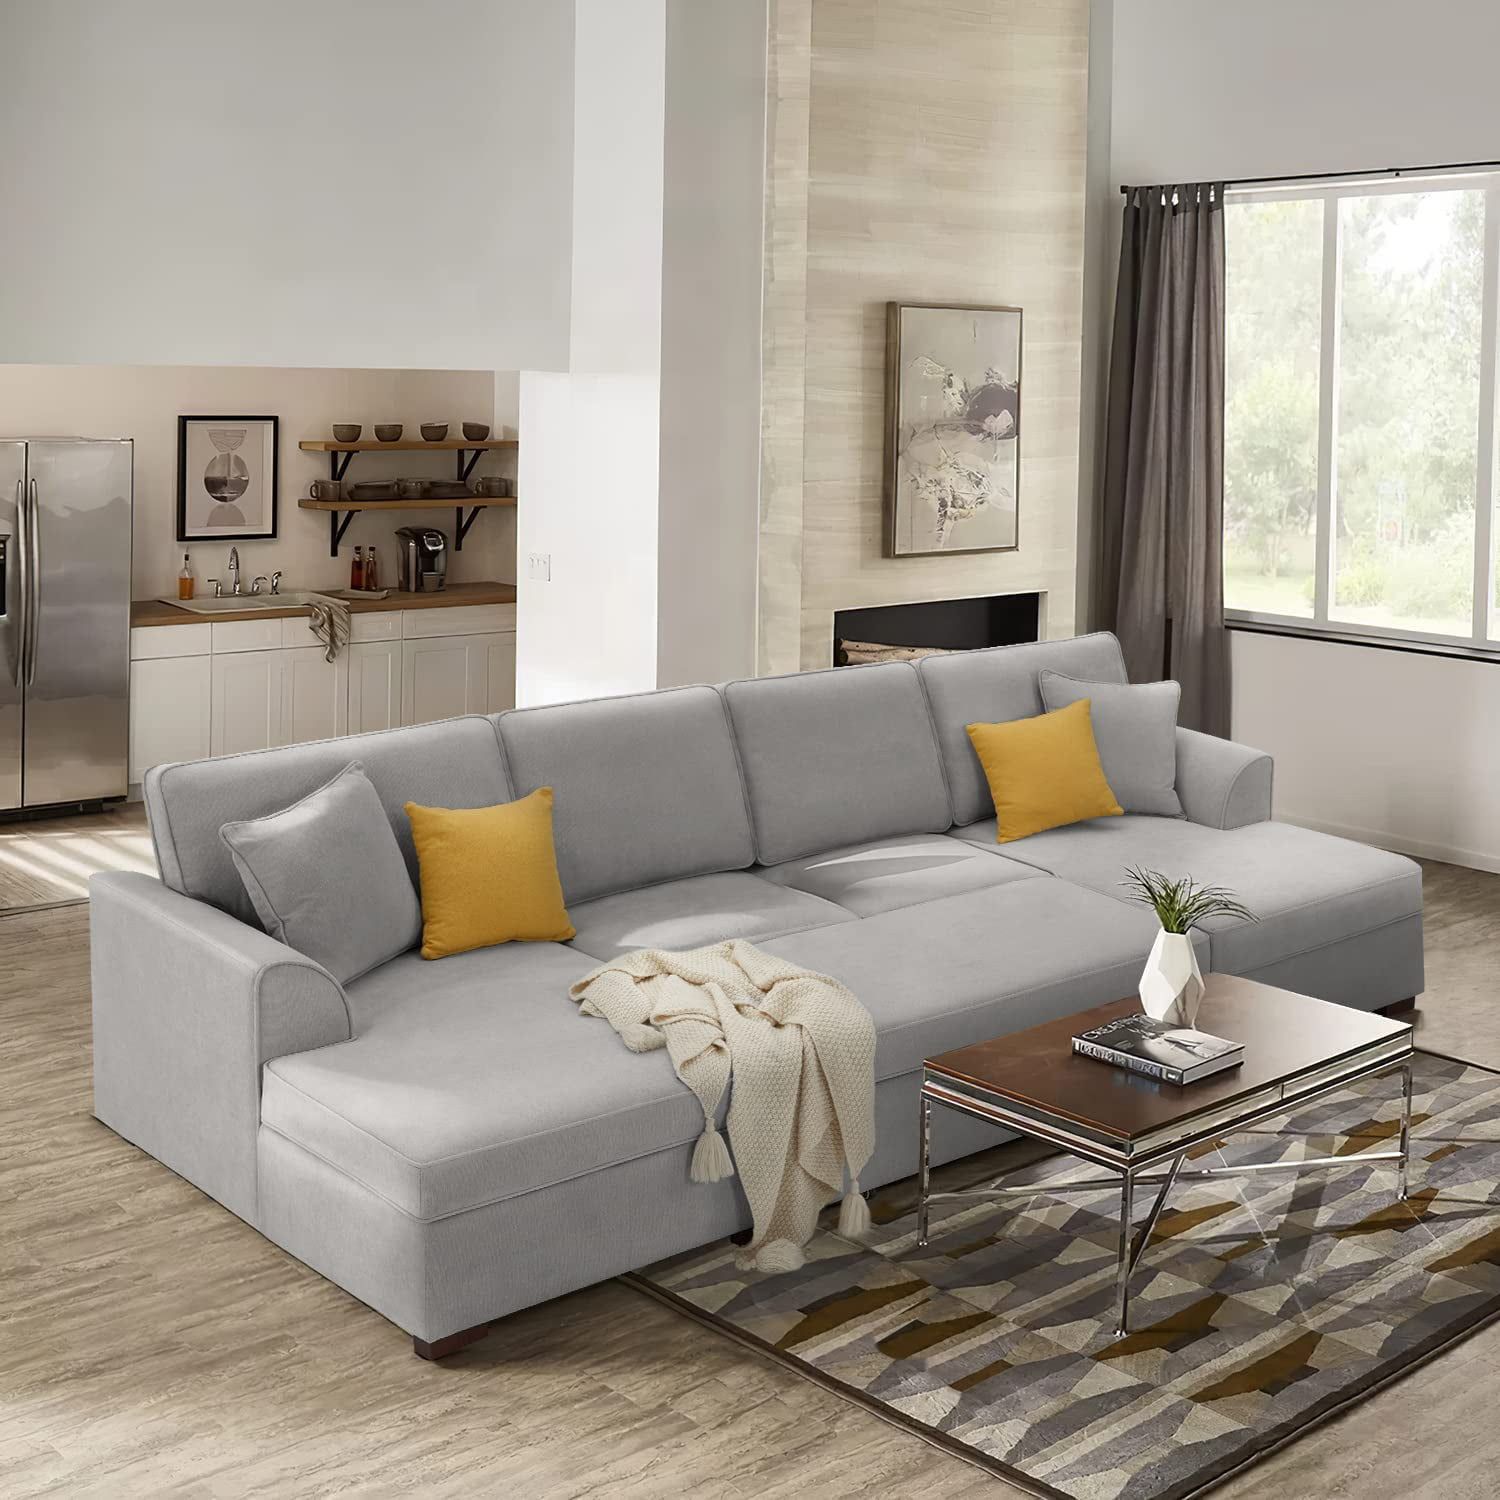 Mellcom U Shaped Sectional Sofa With Pull Out Bed, Upholstered Modular Couch  With Storage, Gray – Walmart Pertaining To Upholstered Modular Couches With Storage (View 11 of 15)